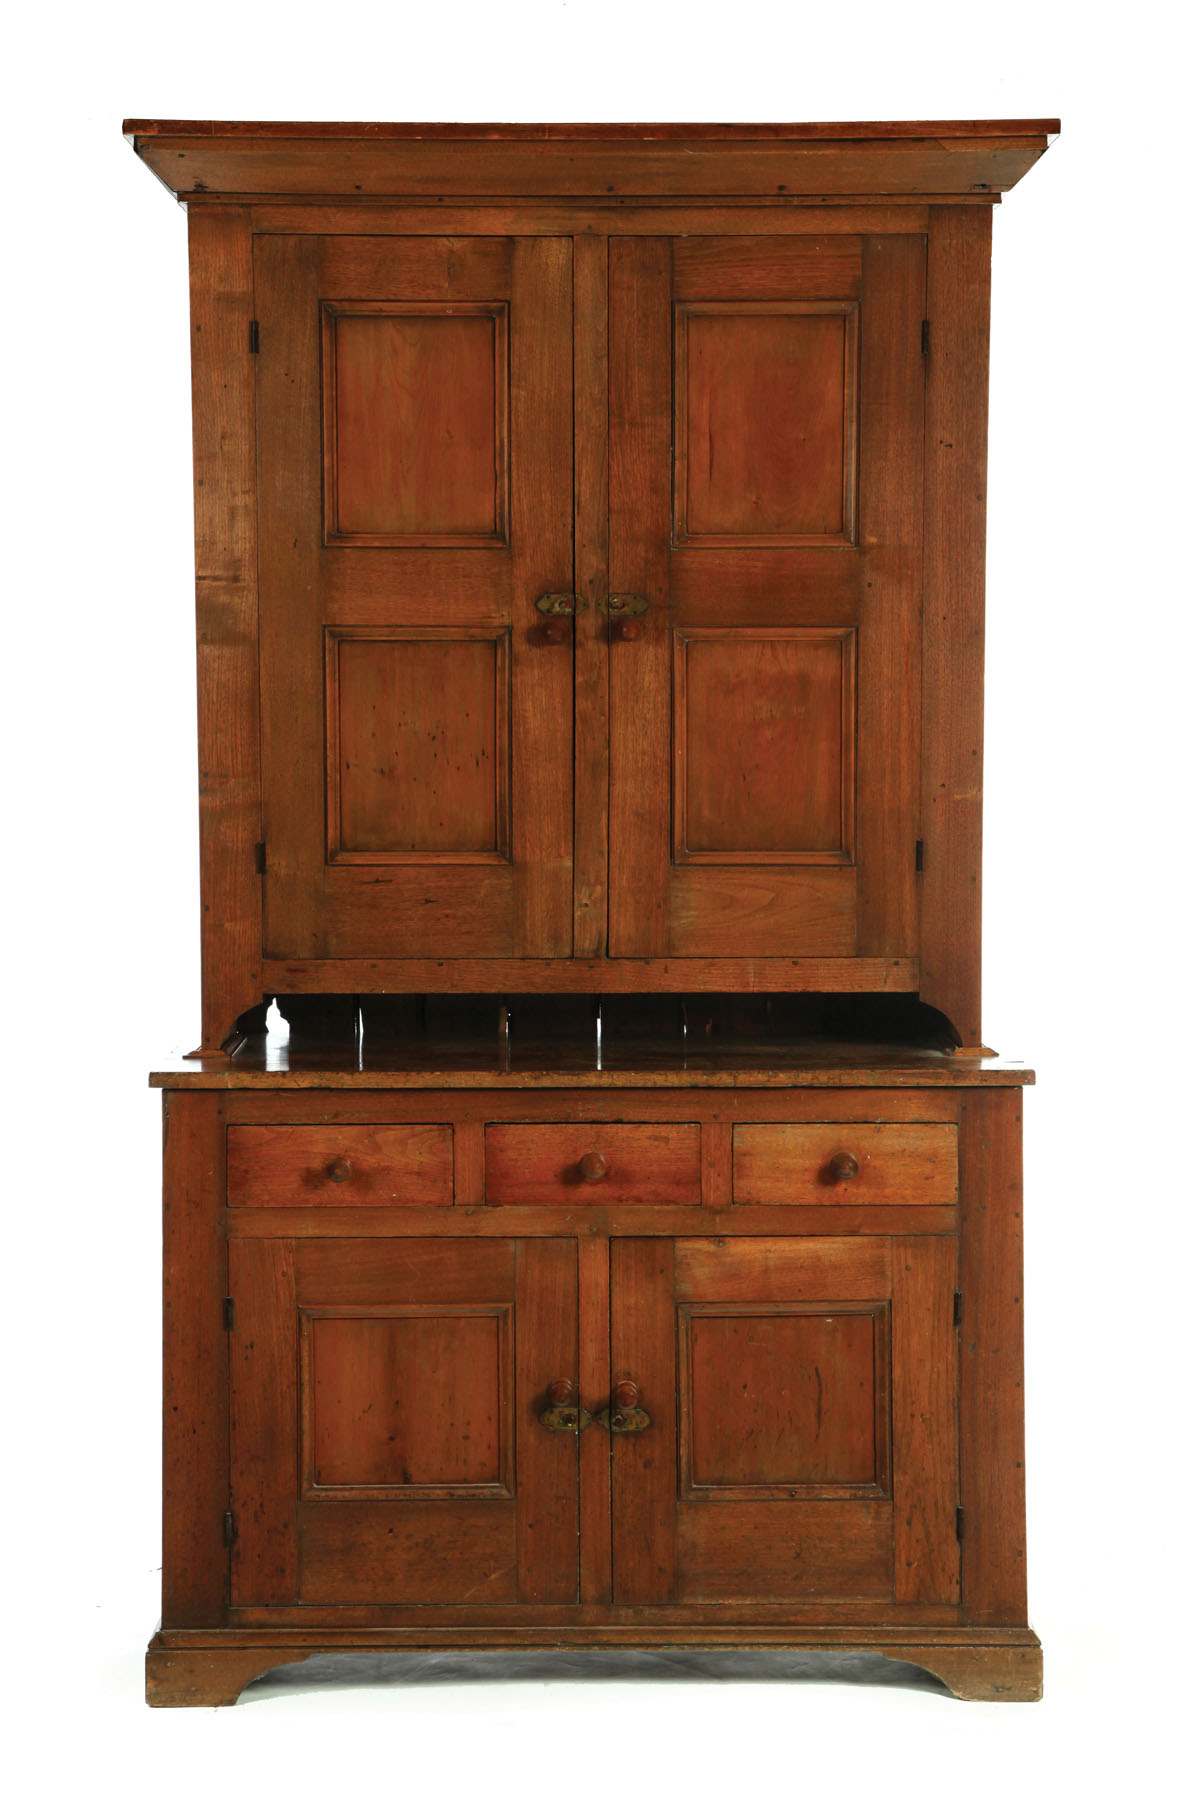 COUNTRY STEPBACK CUPBOARD Probably 117102